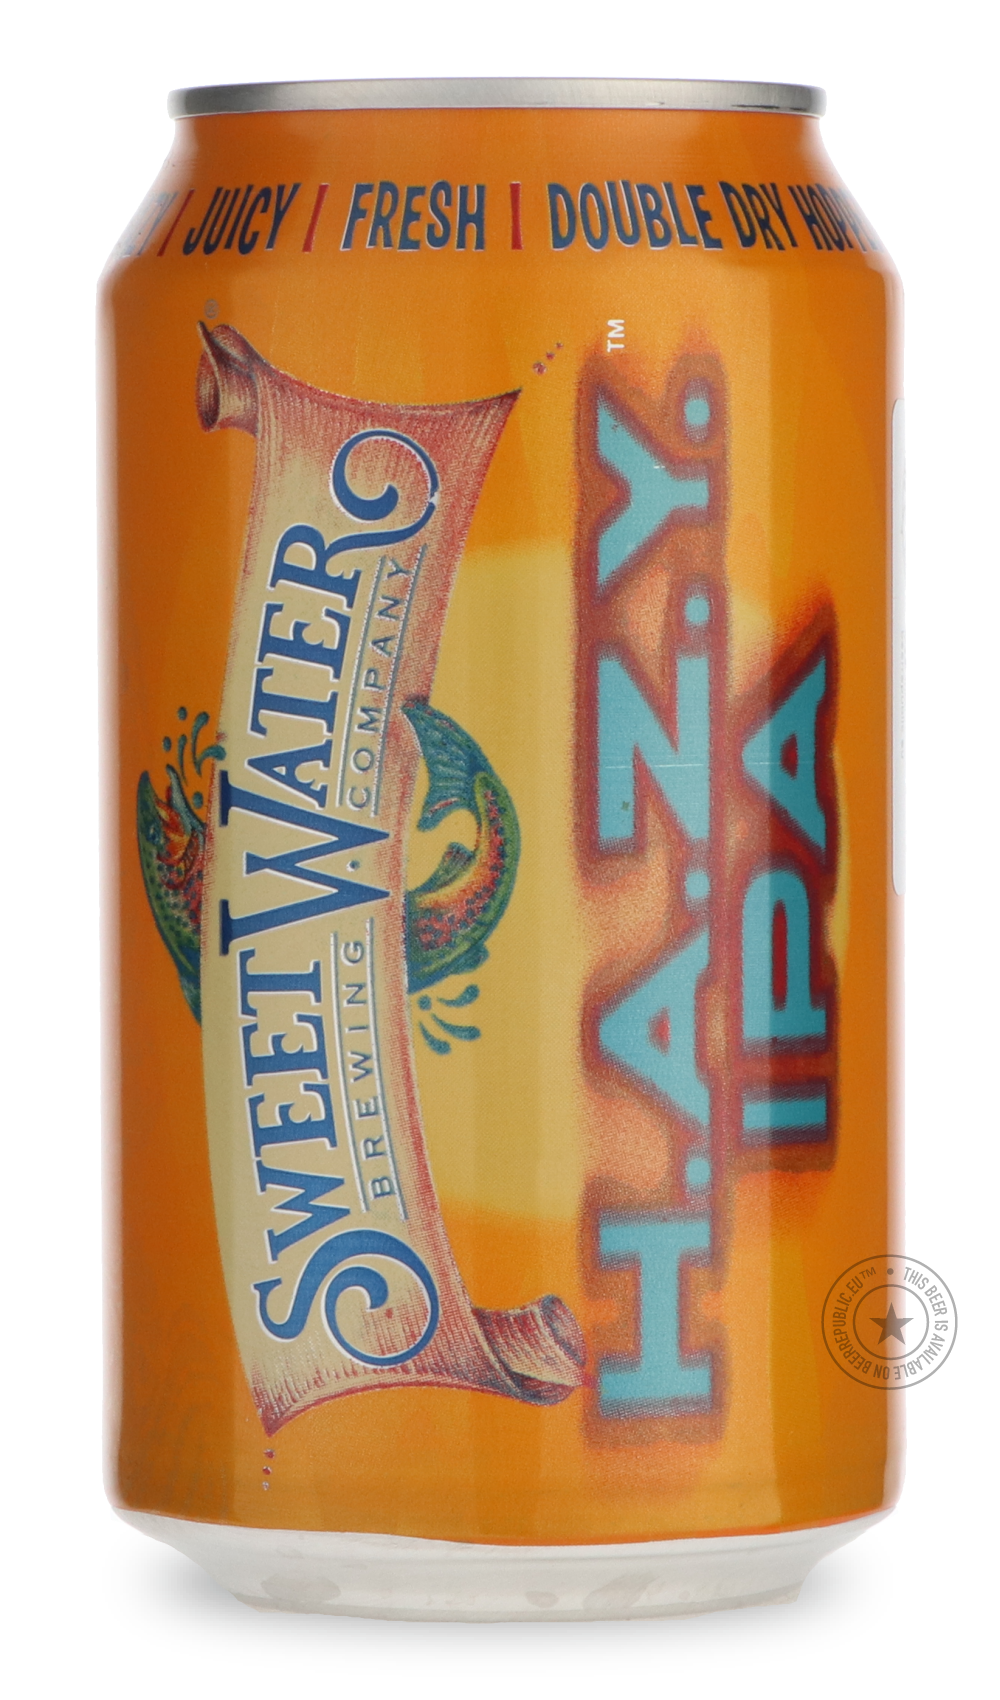 -SweetWater- H.A.Z.Y. IPA-IPA- Only @ Beer Republic - The best online beer store for American & Canadian craft beer - Buy beer online from the USA and Canada - Bier online kopen - Amerikaans bier kopen - Craft beer store - Craft beer kopen - Amerikanisch bier kaufen - Bier online kaufen - Acheter biere online - IPA - Stout - Porter - New England IPA - Hazy IPA - Imperial Stout - Barrel Aged - Barrel Aged Imperial Stout - Brown - Dark beer - Blond - Blonde - Pilsner - Lager - Wheat - Weizen - Amber - Barley 